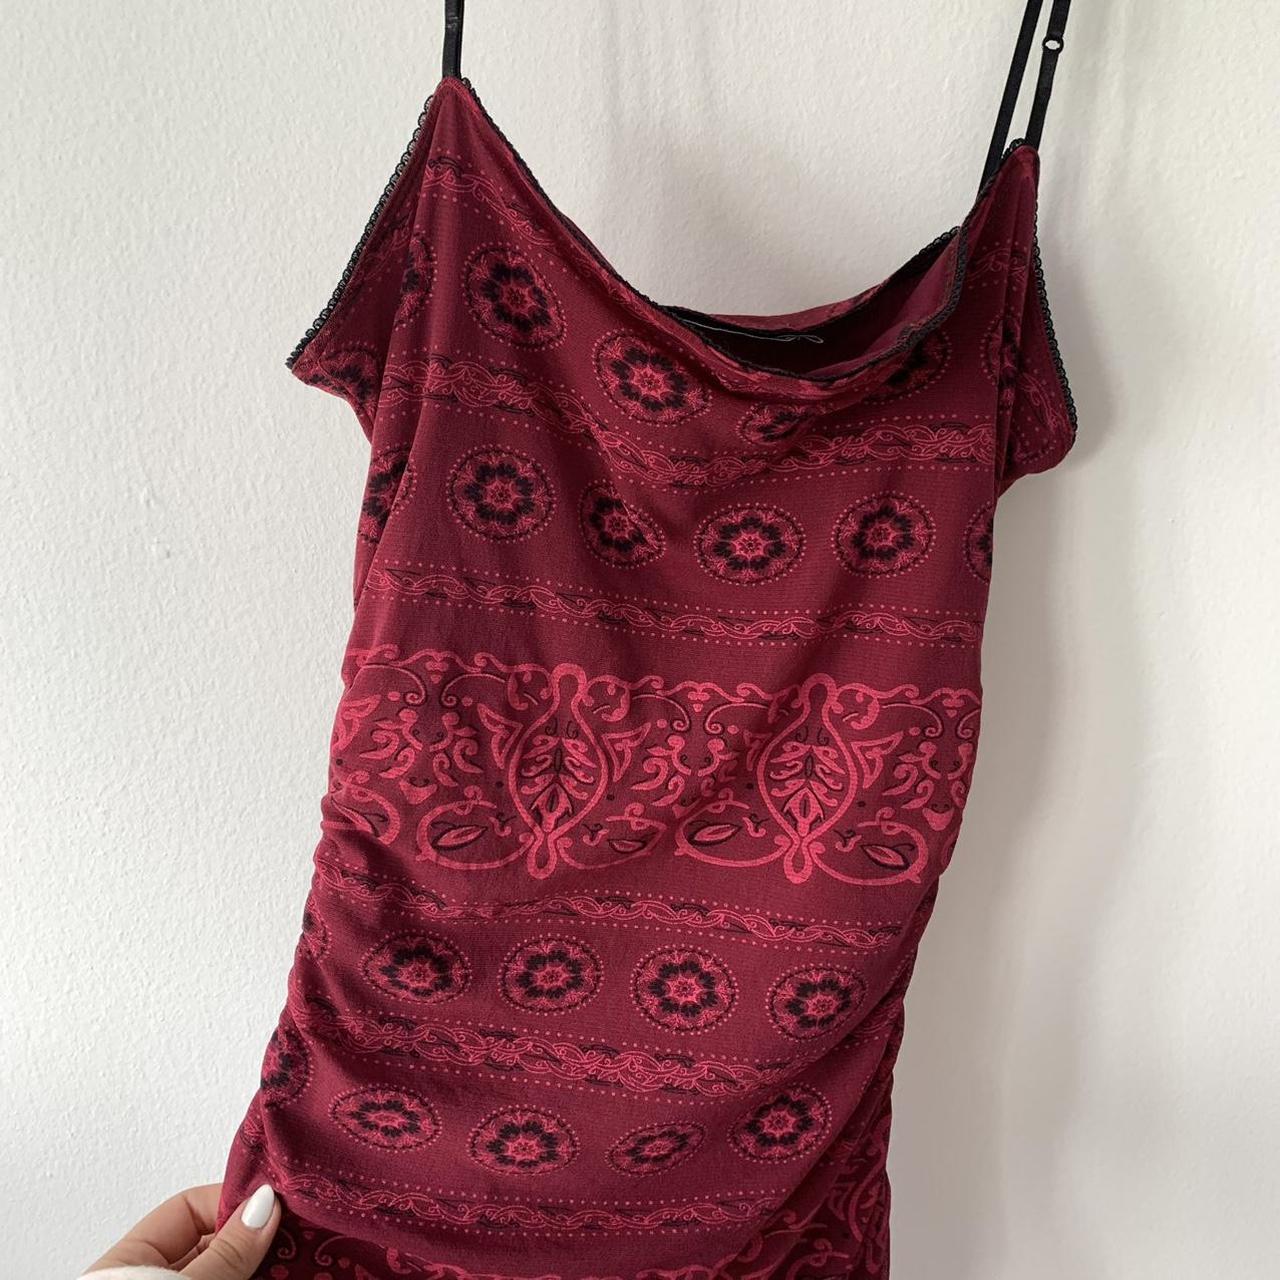 Found this vintage Jean Paul Gaultier dress today! I have found similar  ones online but not this exact pattern. Does anyone know anything about it/  how to price? : r/Depop